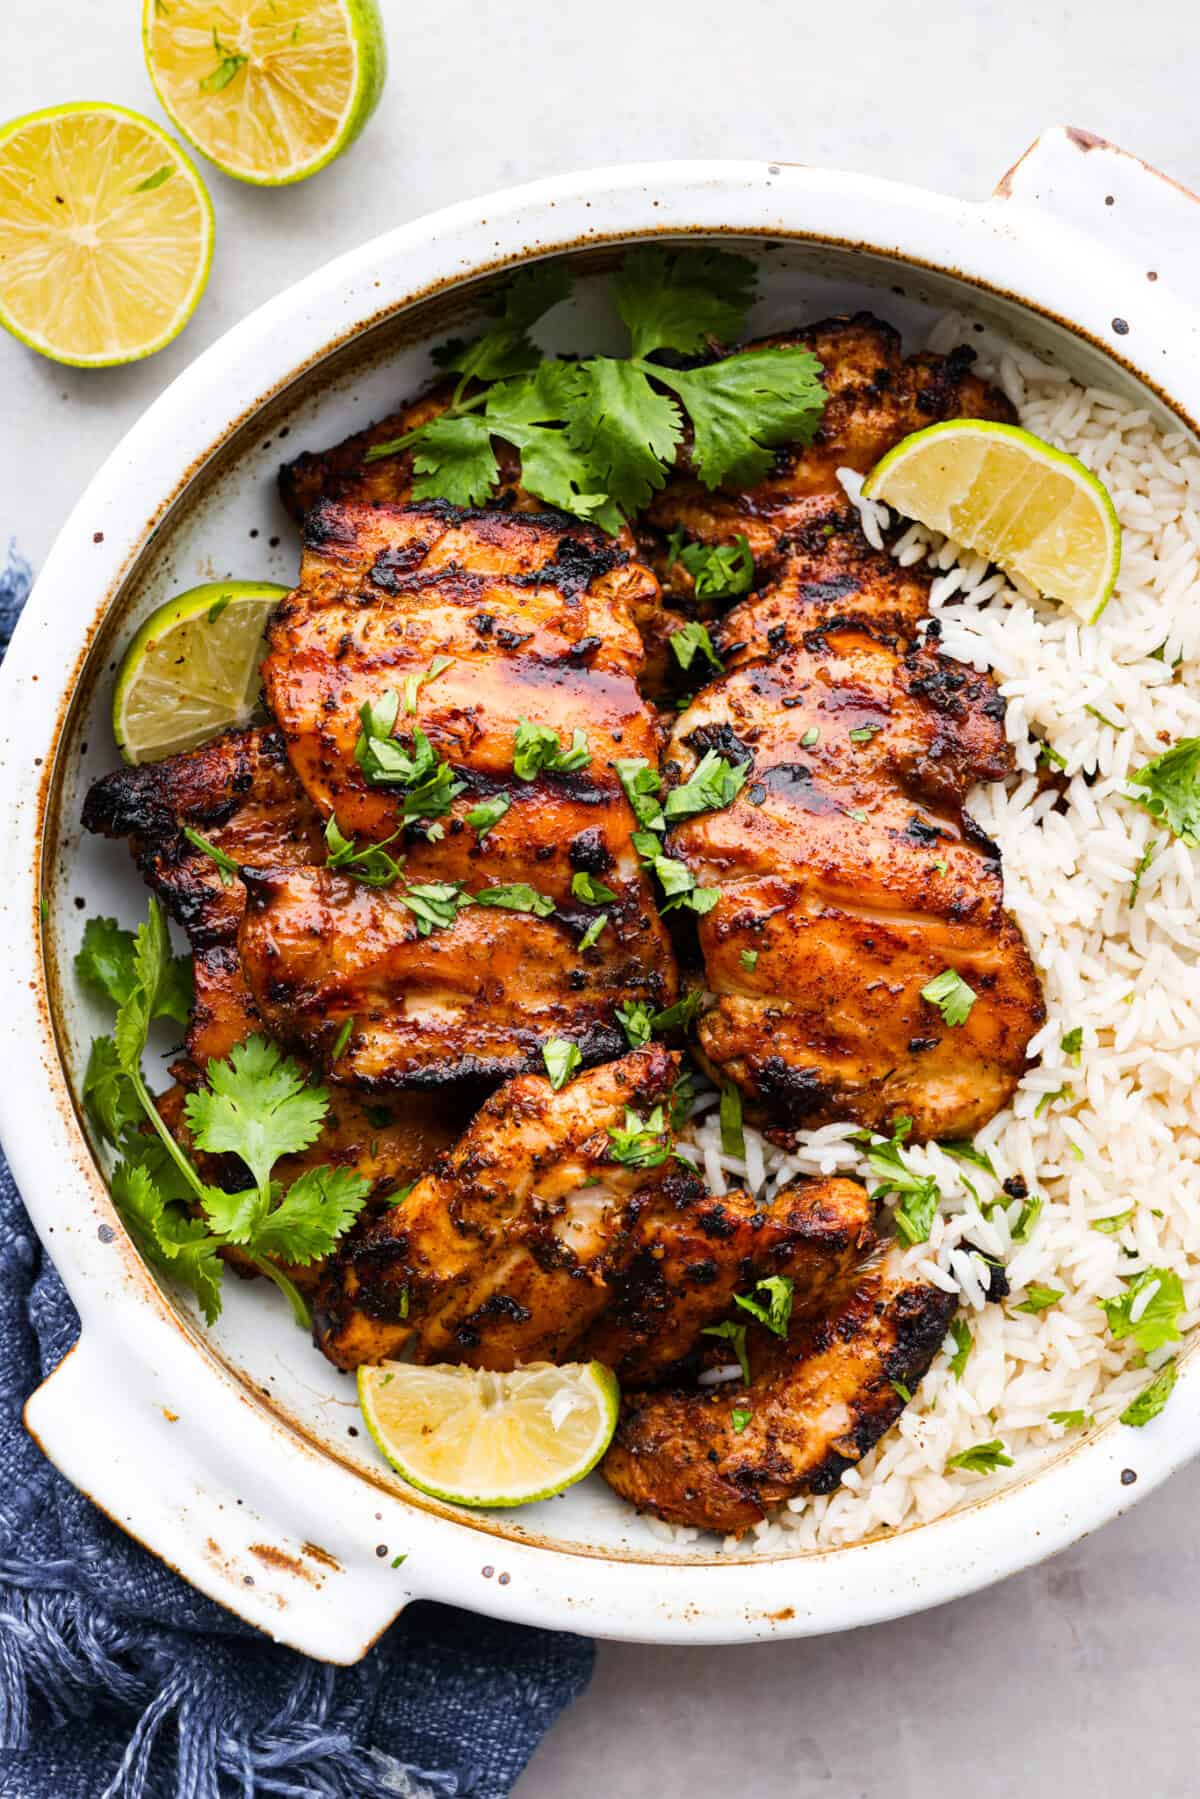 Mexican grilled chicken served over rice. It's garnished with fresh herbs and lime slices.